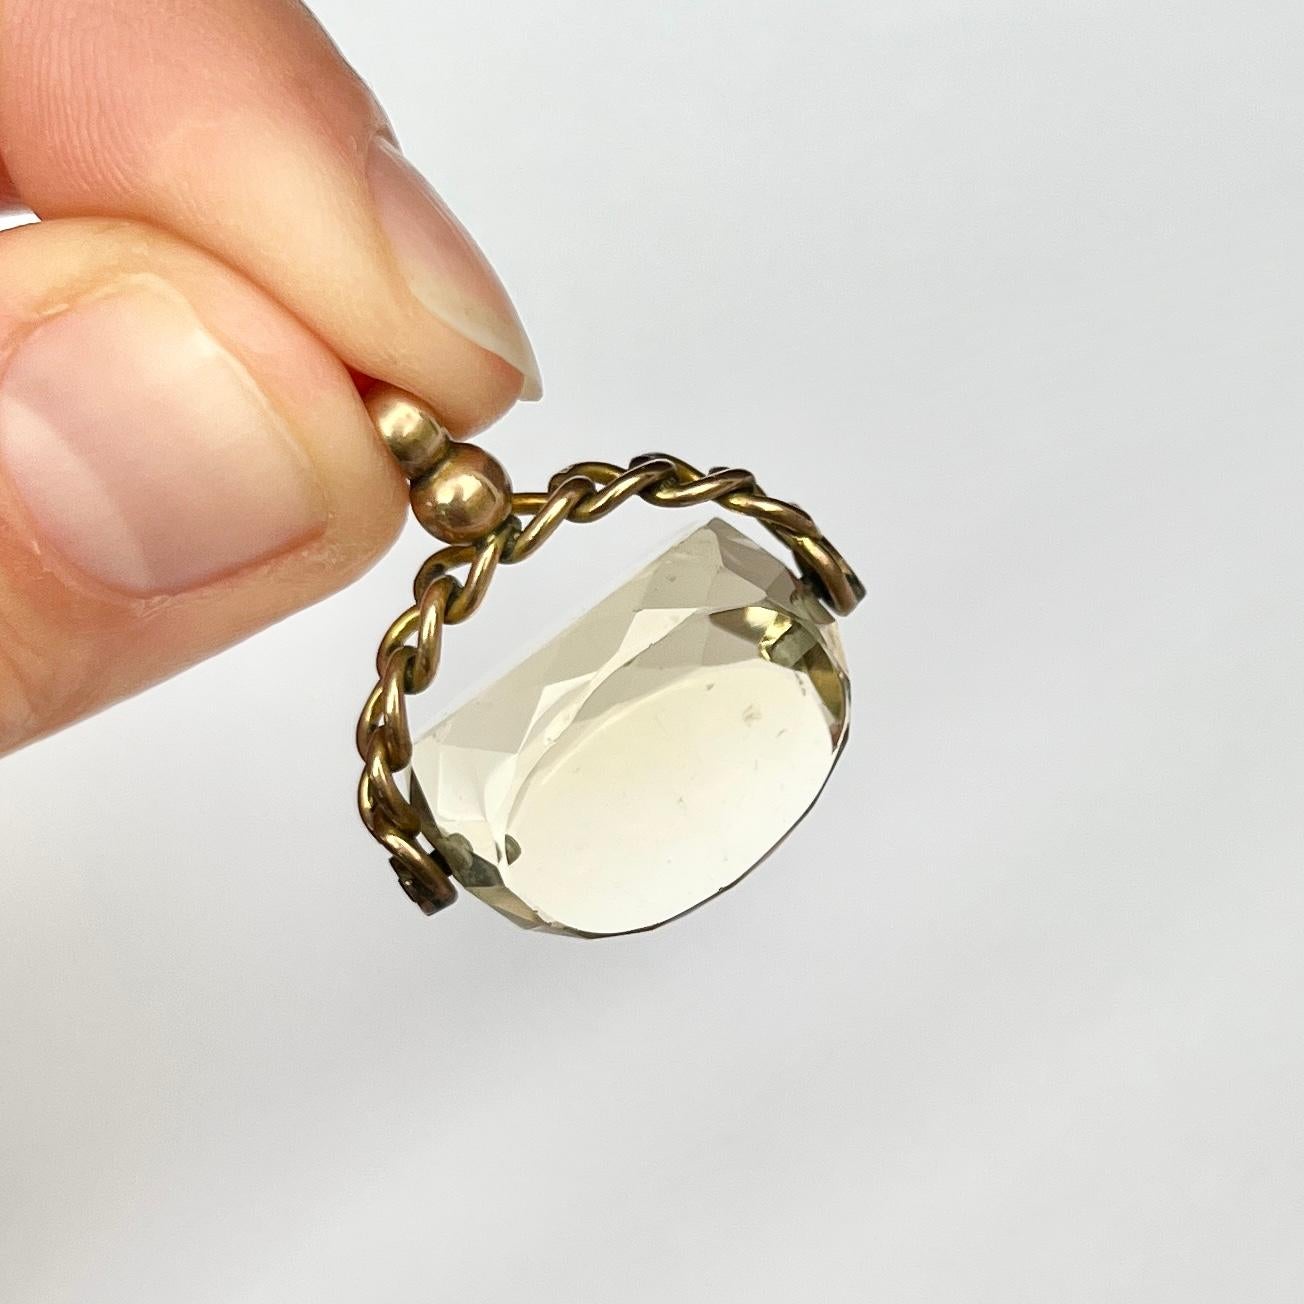 This gorgeous swivel fob holds a yellow citrine stone and the frame and loop is modelled out of 9ct gold. The frame has a chain feel to it and twists and turns. 

Height including Loop: 26mm
Stone Width: 19mm

Weight: 6.5g 